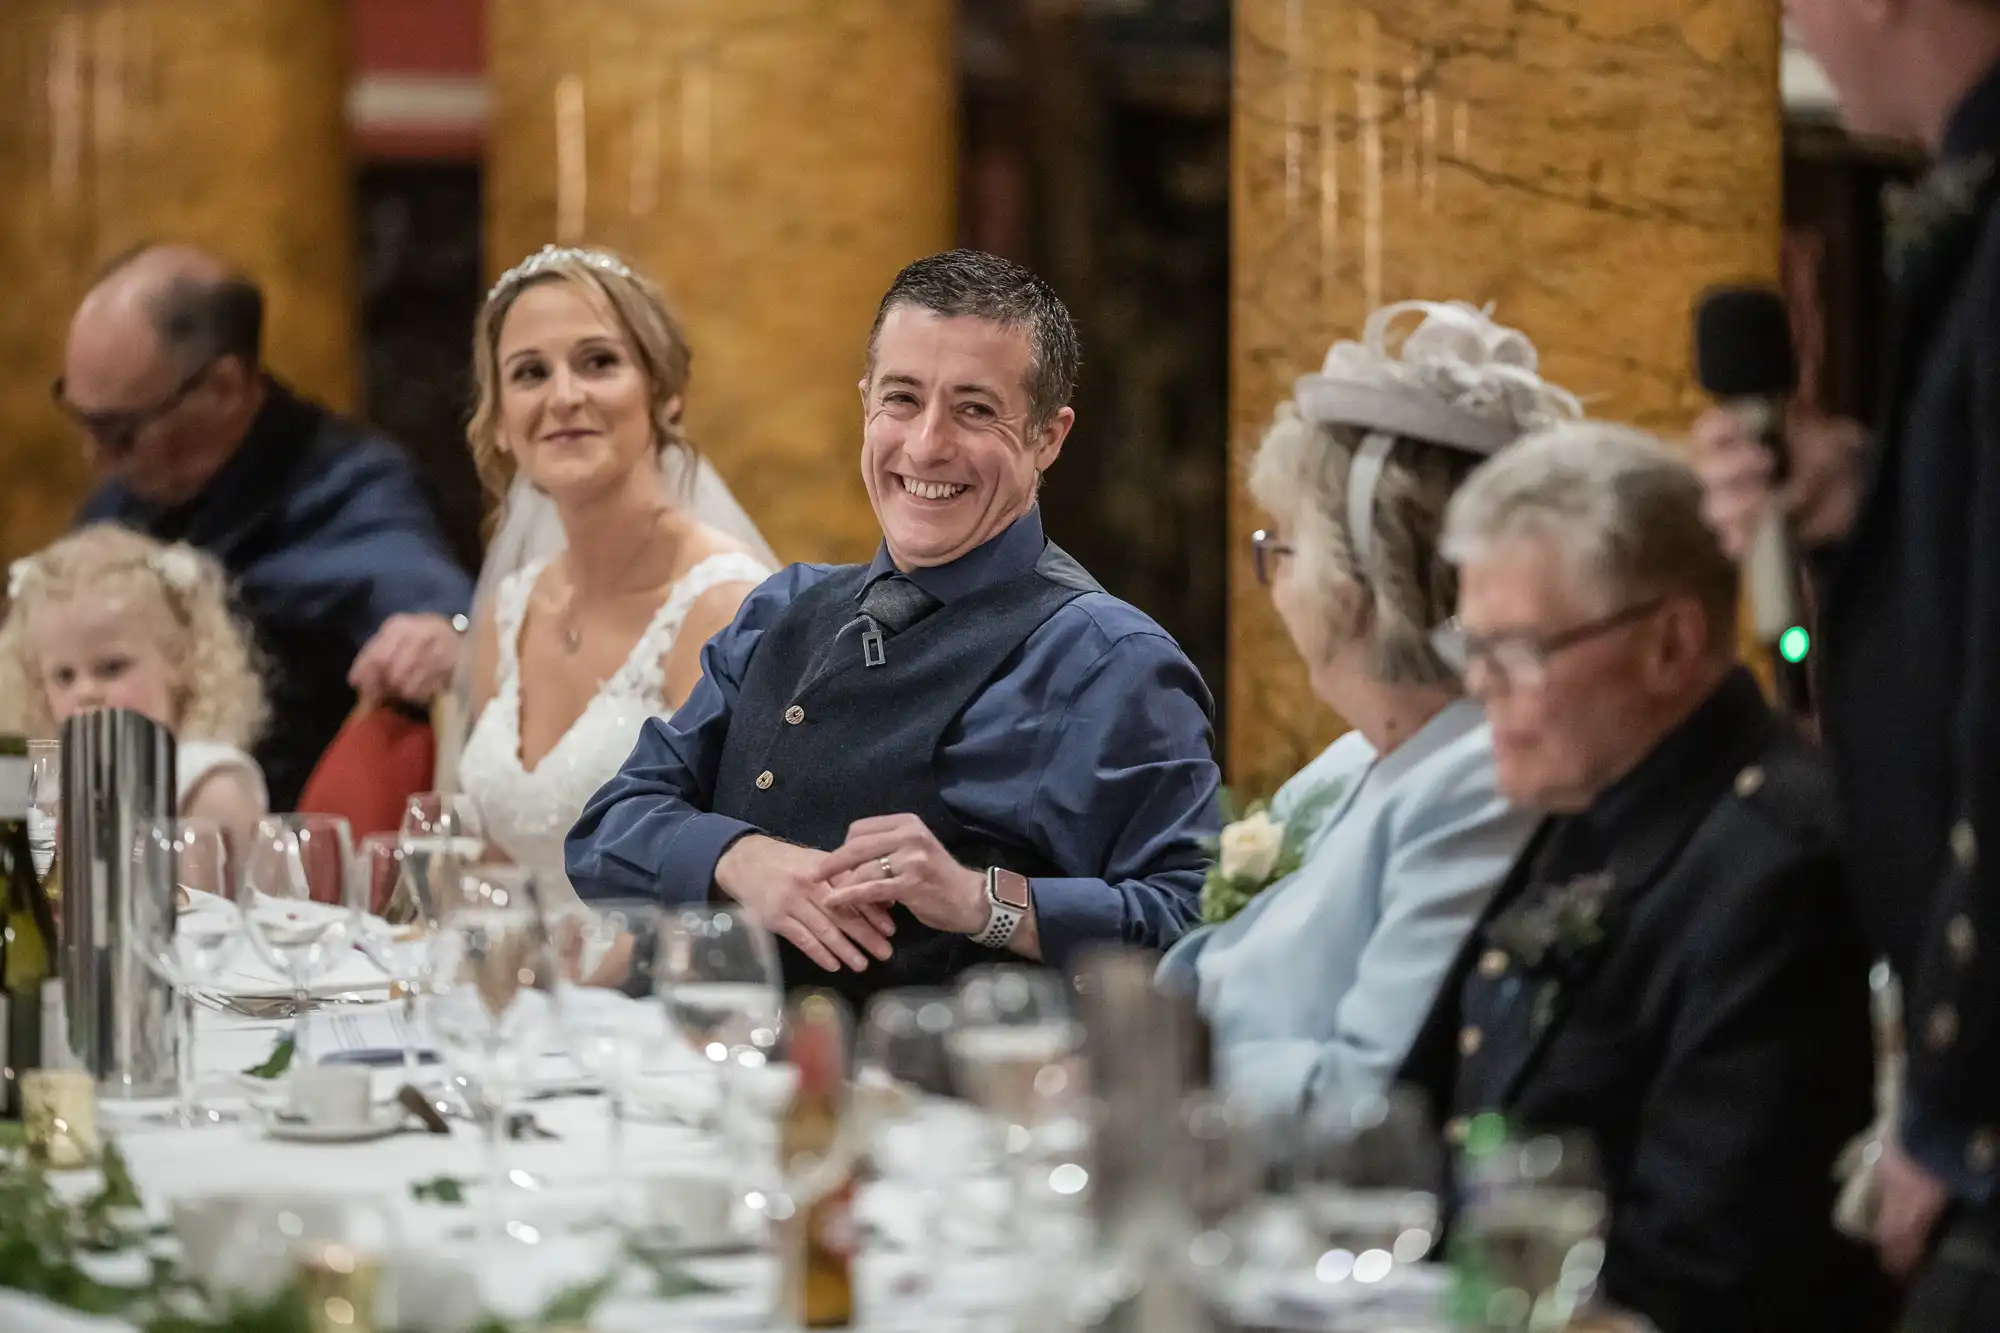 A wedding reception scene with a bride, groom, and guests seated at a long table. The groom smiles, and the bride looks on with other family members and friends.